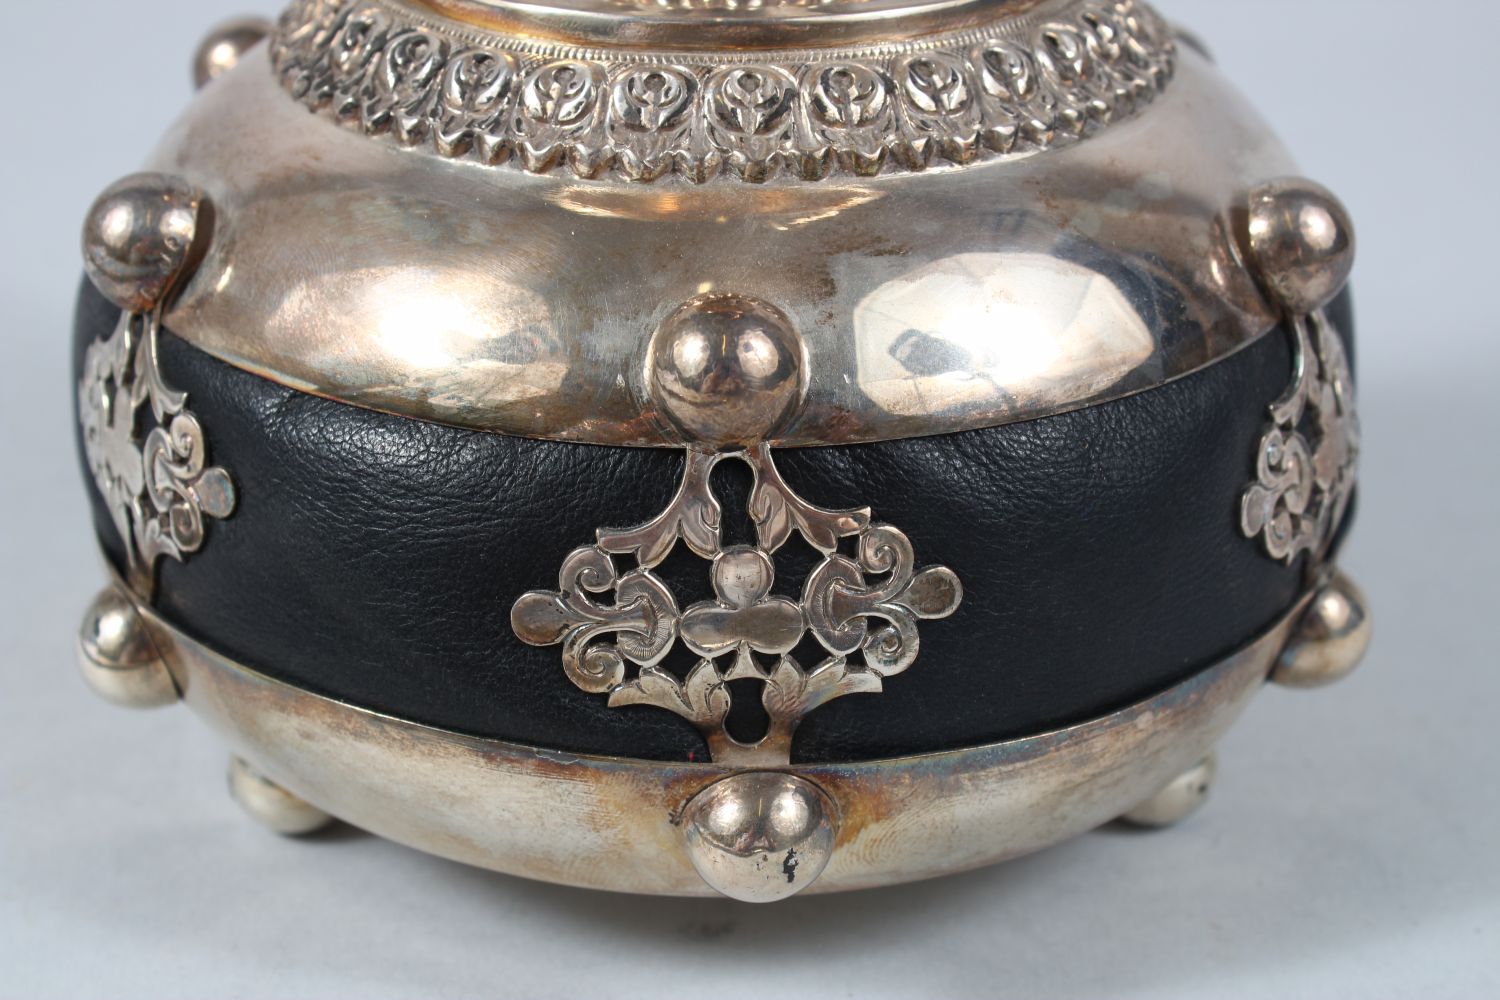 A FINE 19TH CENTURY INDIAN SILVER HUQQA BASE, 31cm high ( base alone ). - Image 4 of 11